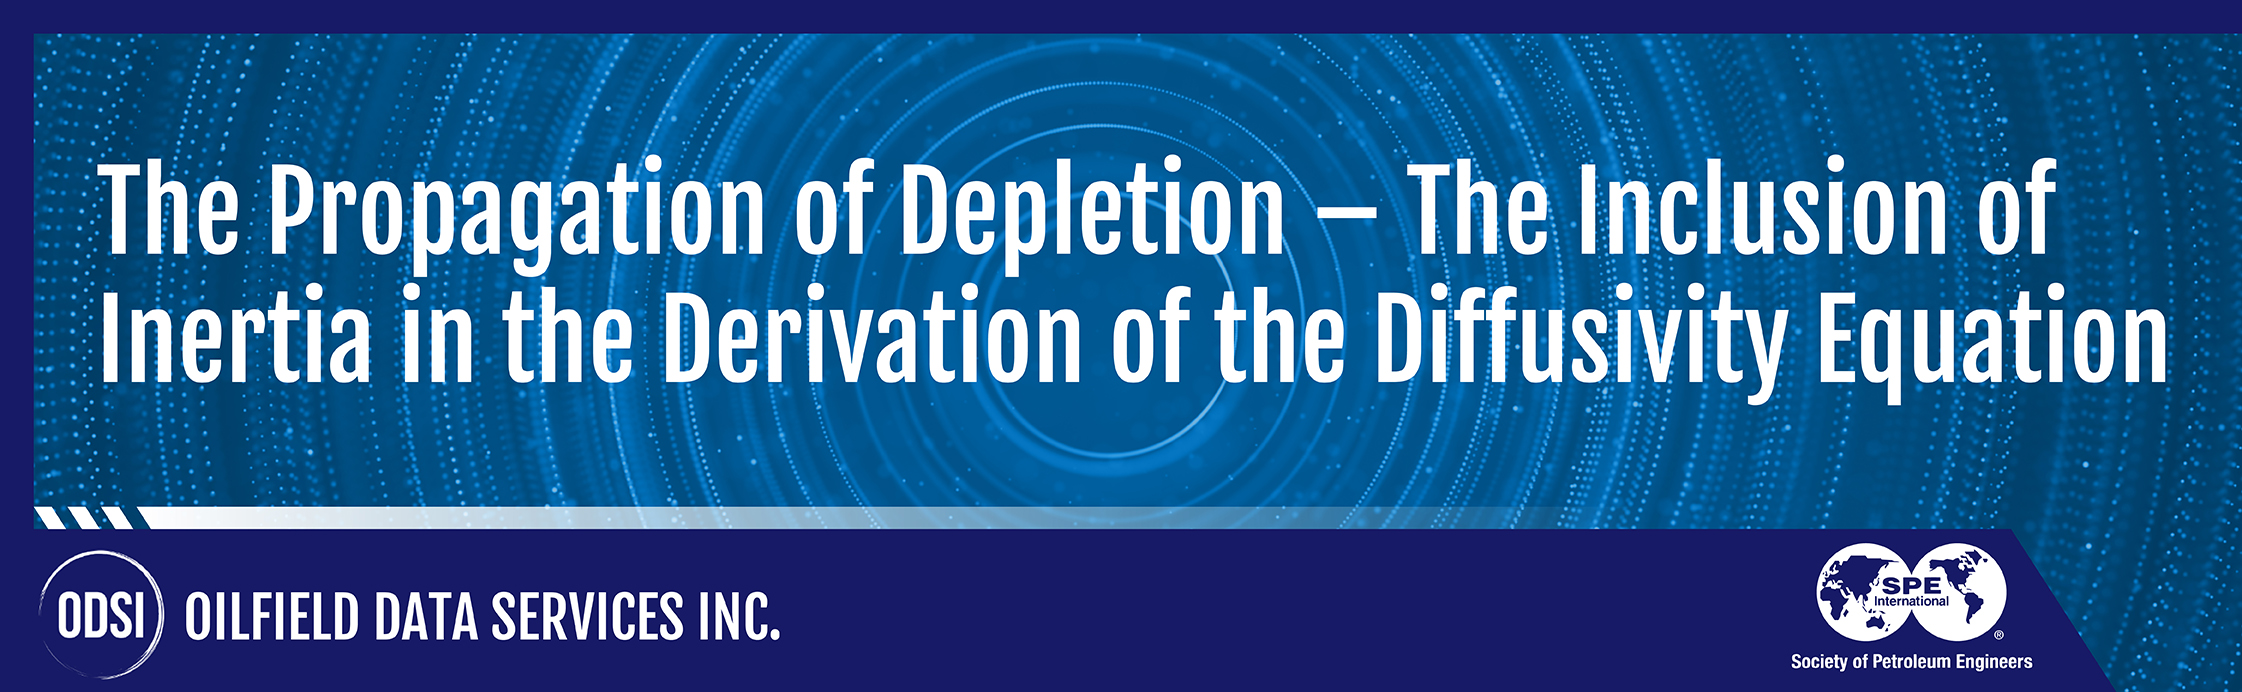 The Propagation of Depletion - The Inclusion of Inertia in the Derivation of the Diffusivity Equation